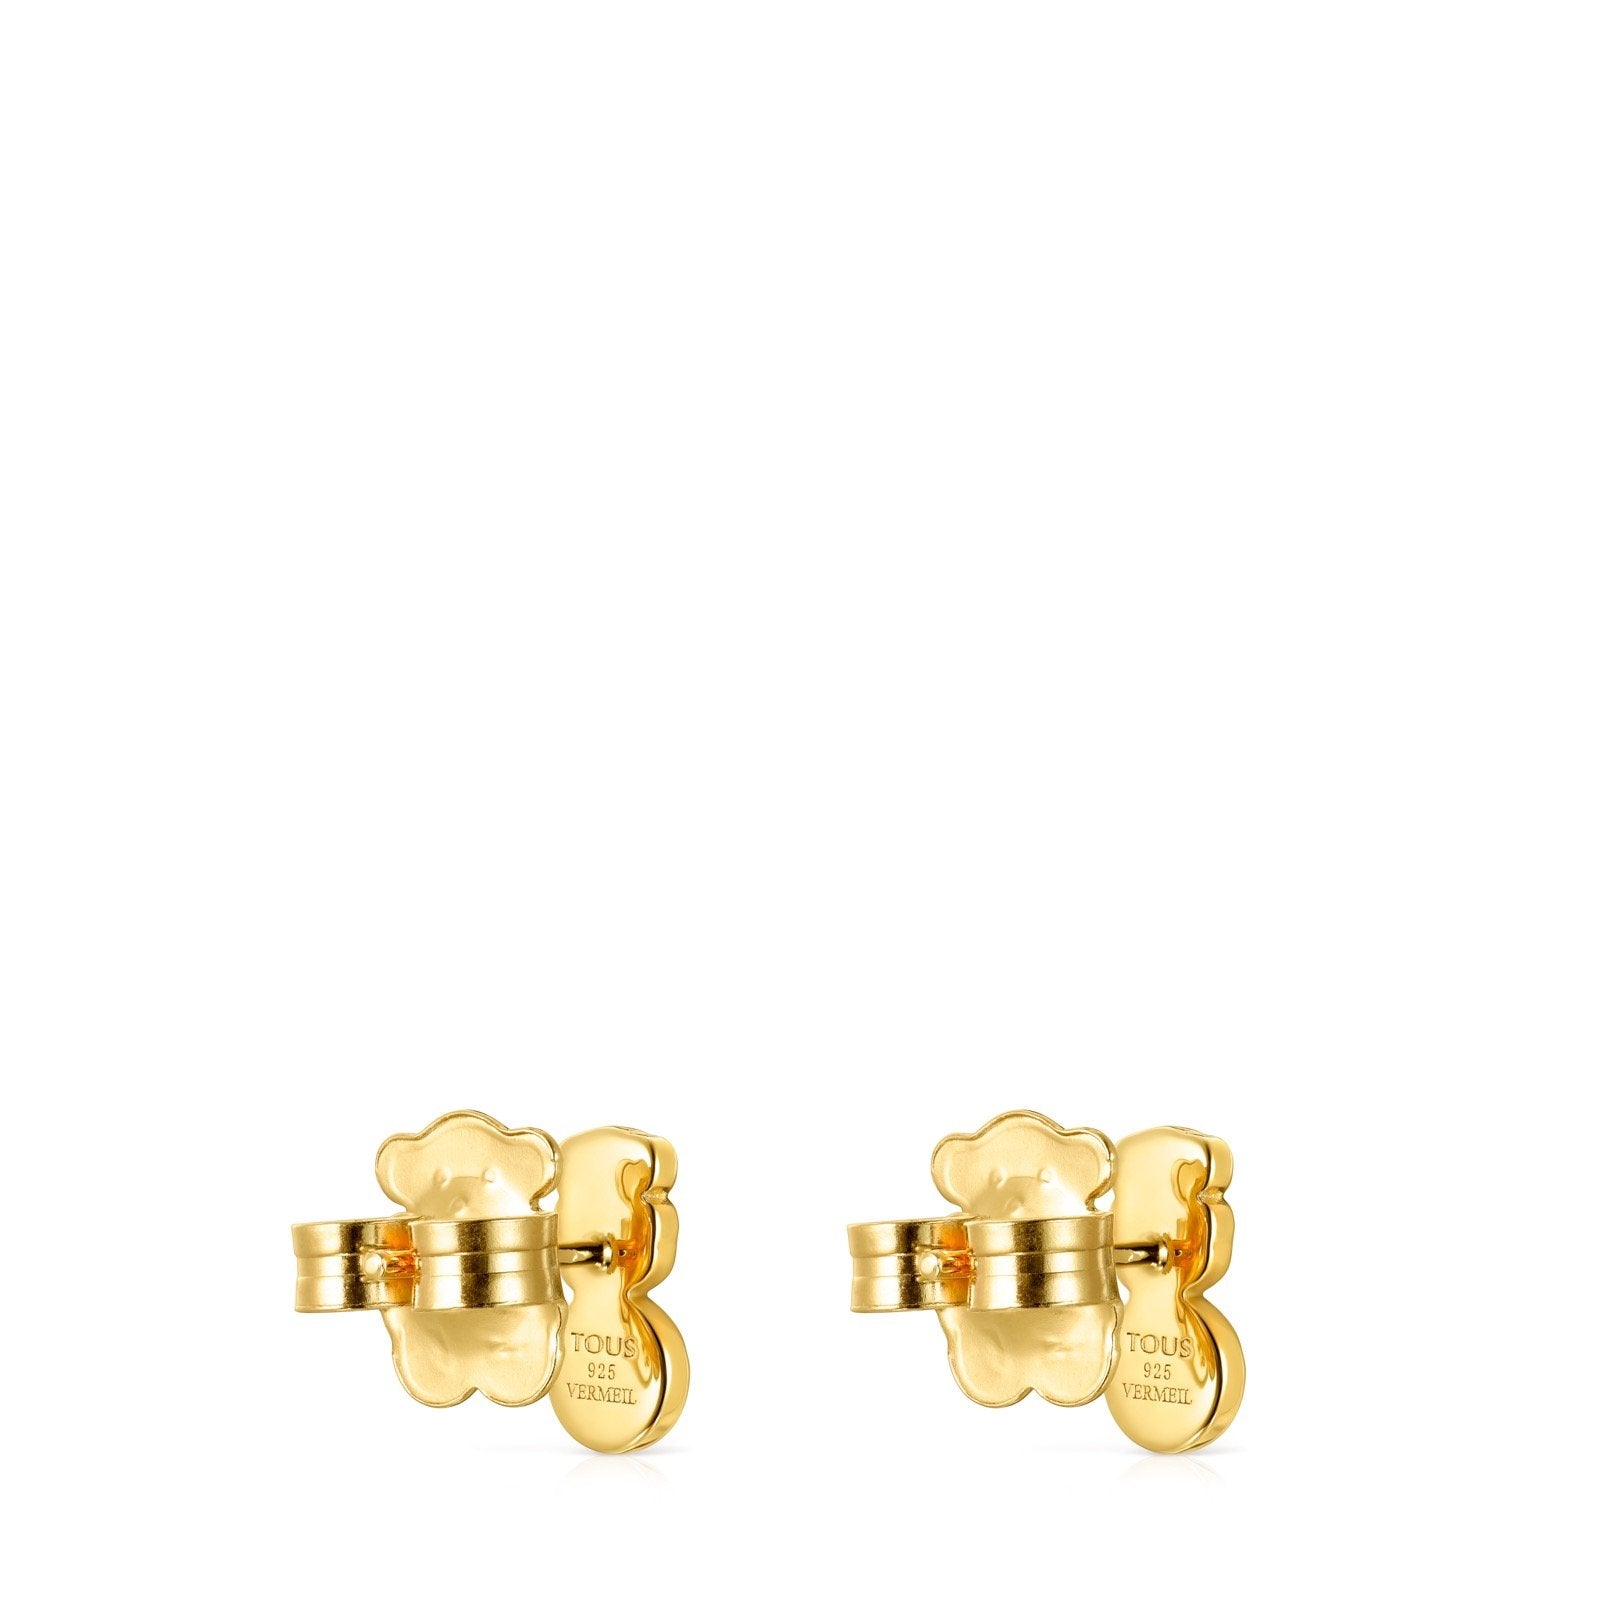 Tous Glory Earrings in Vermeil Silver with Onyx and Pearl 918593600 –